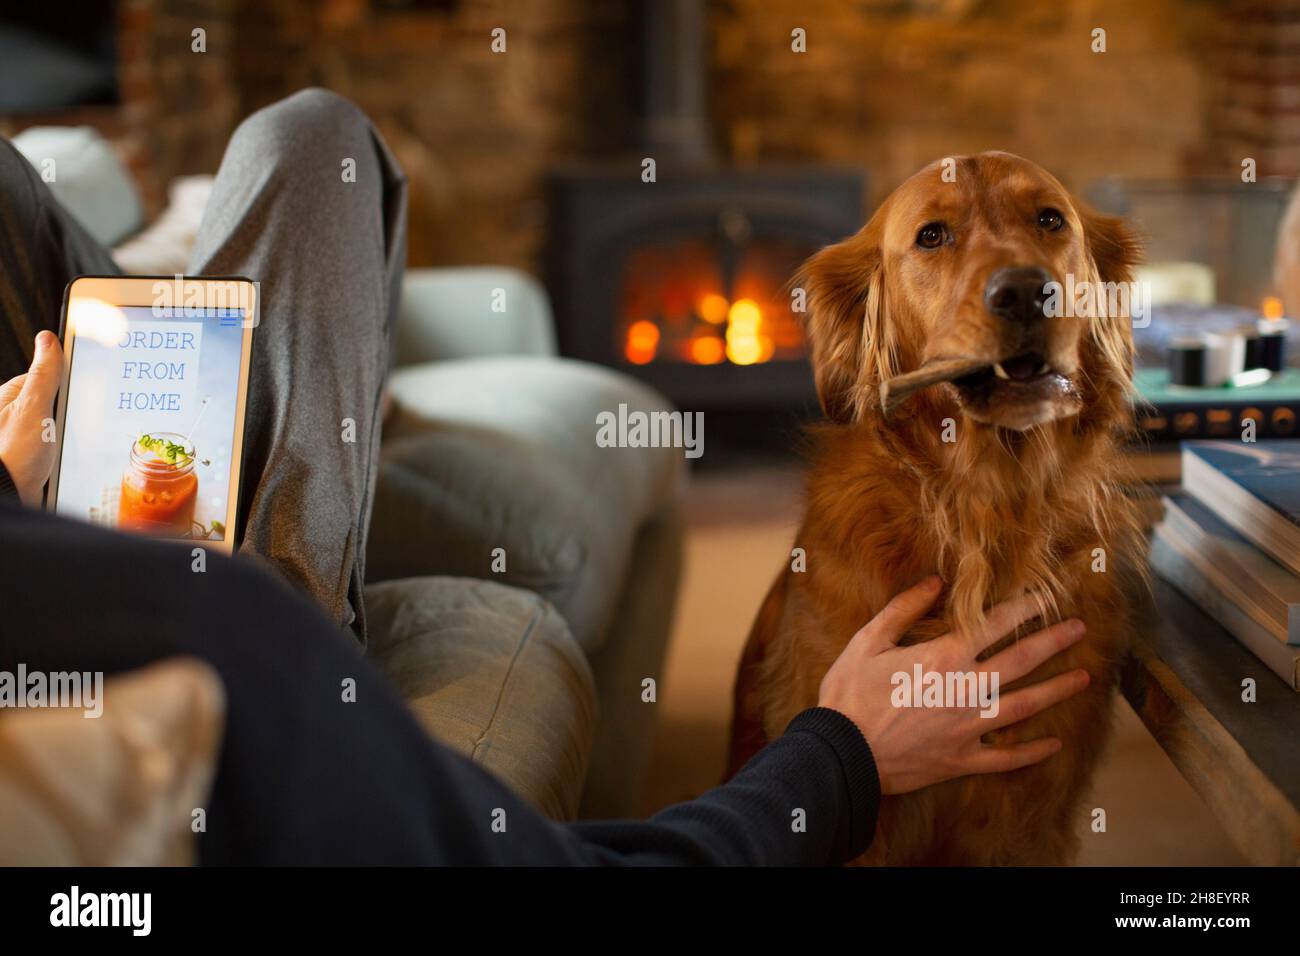 Man with dog ordering online takeout on digital tablet Stock Photo